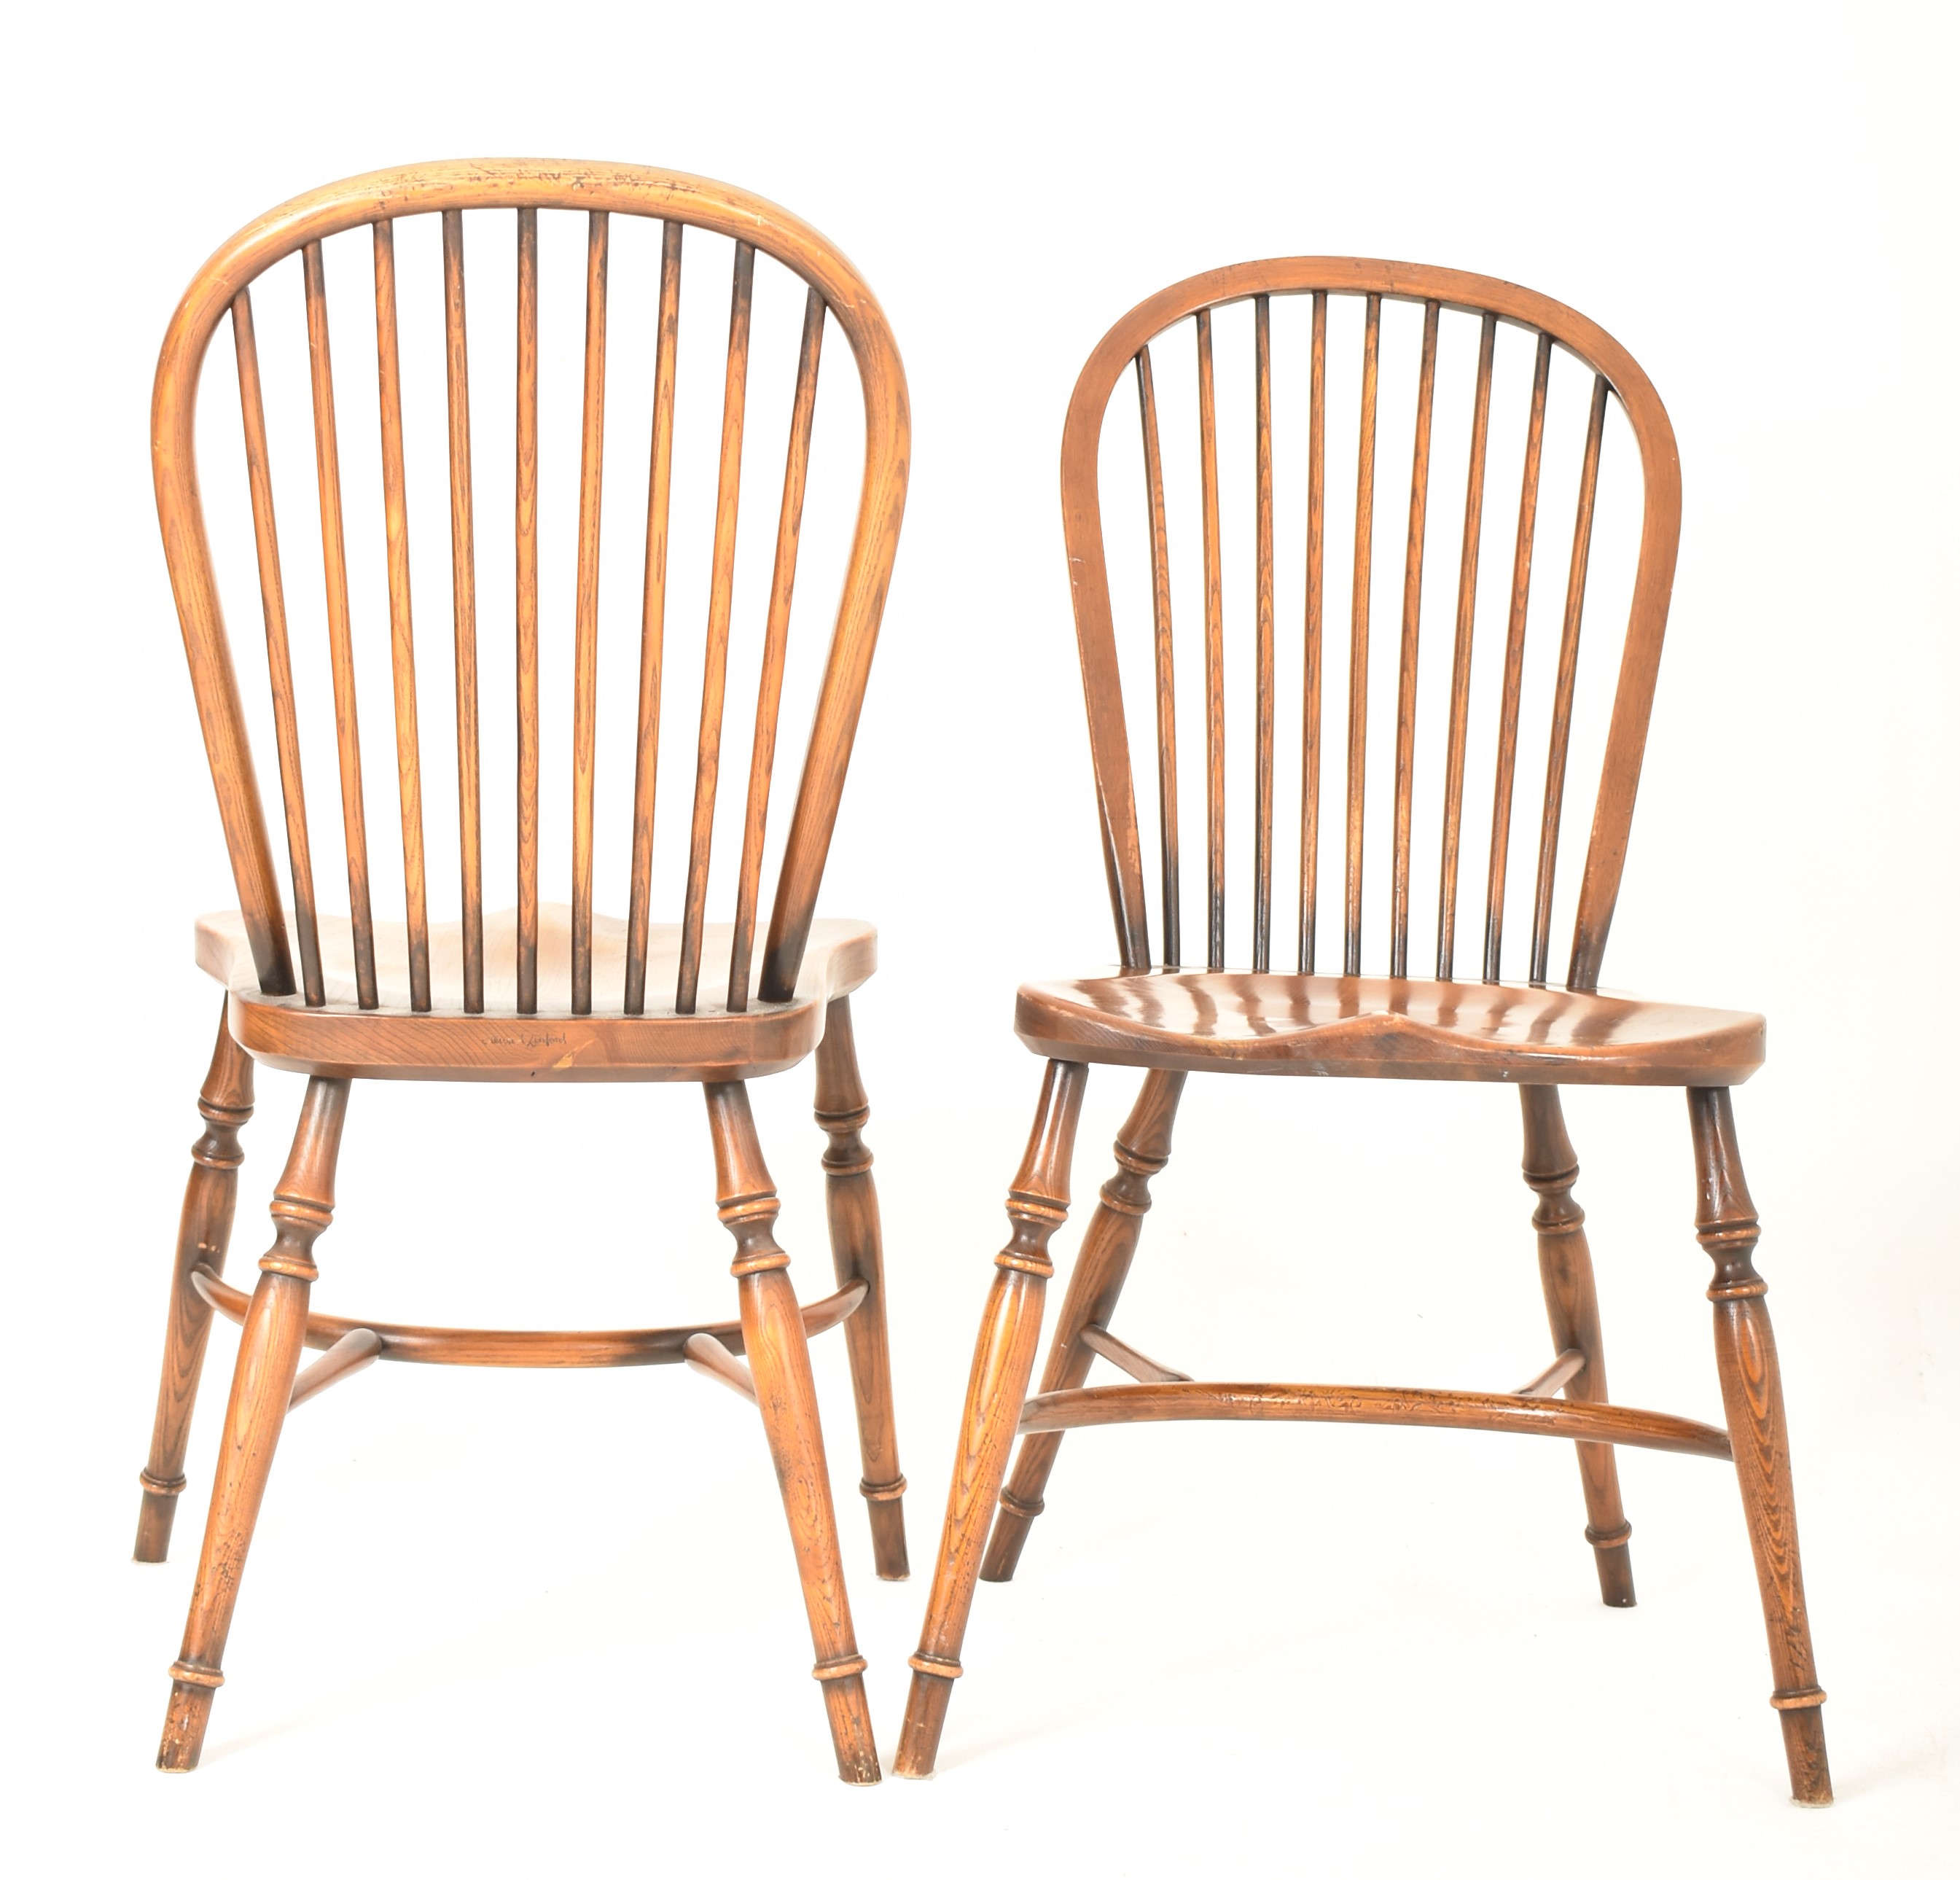 STEWART LINFORD FURNITURE - SIX WINDSOR STYLE STICK BACK CHAIRS - Image 3 of 8